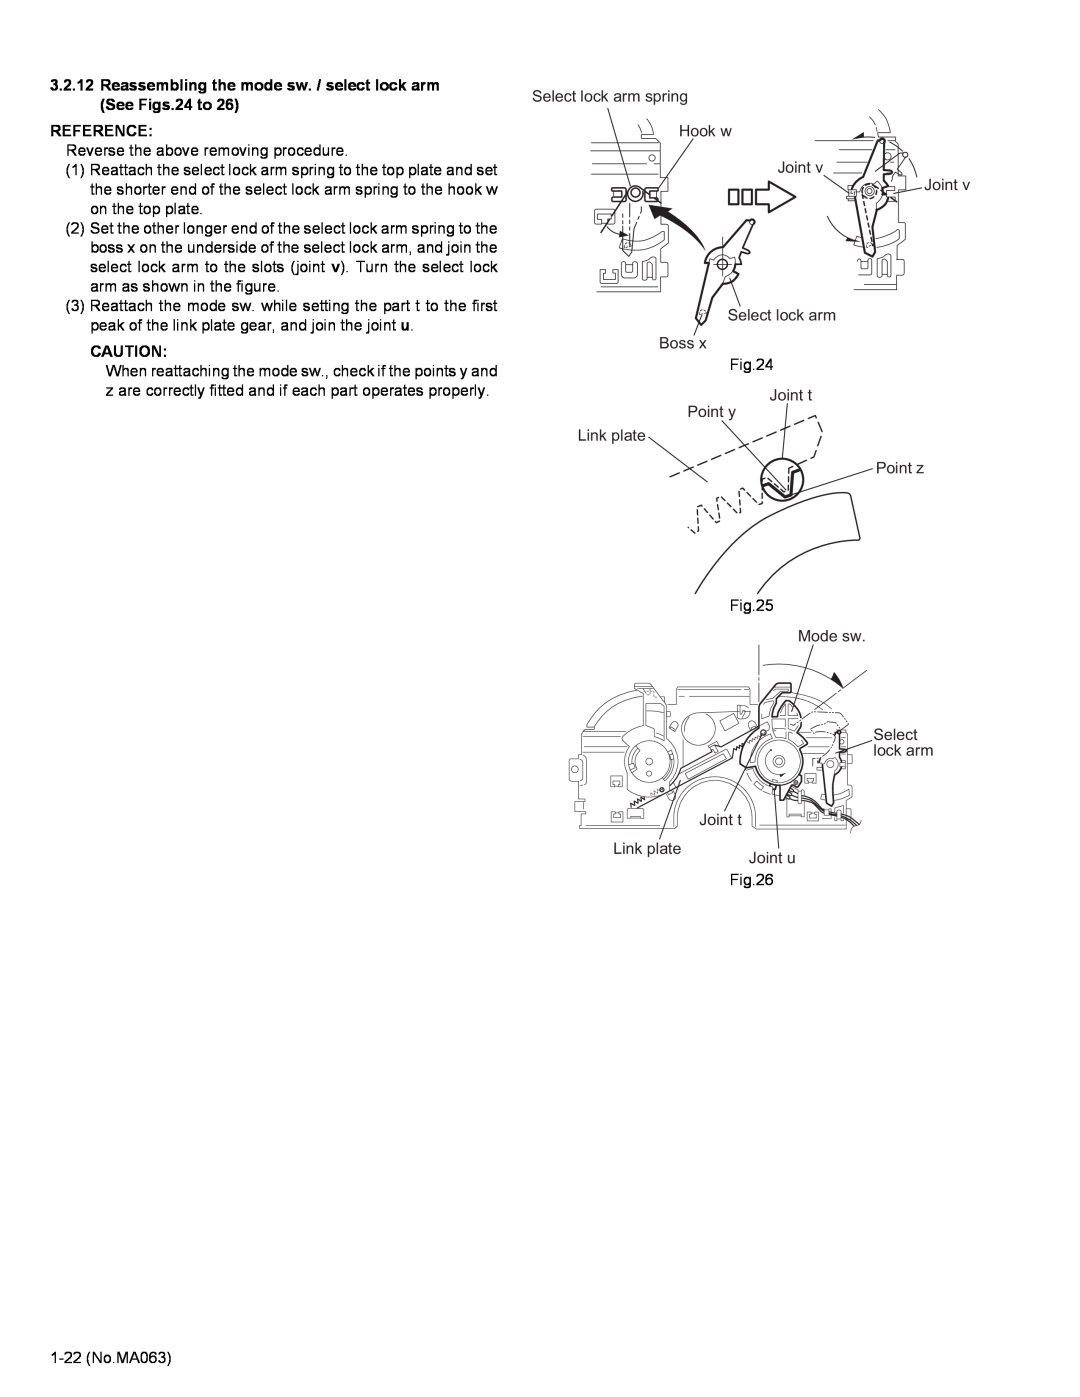 JVC KD-LH401 service manual Reassembling the mode sw. / select lock arm See Figs.24 to, Reference 